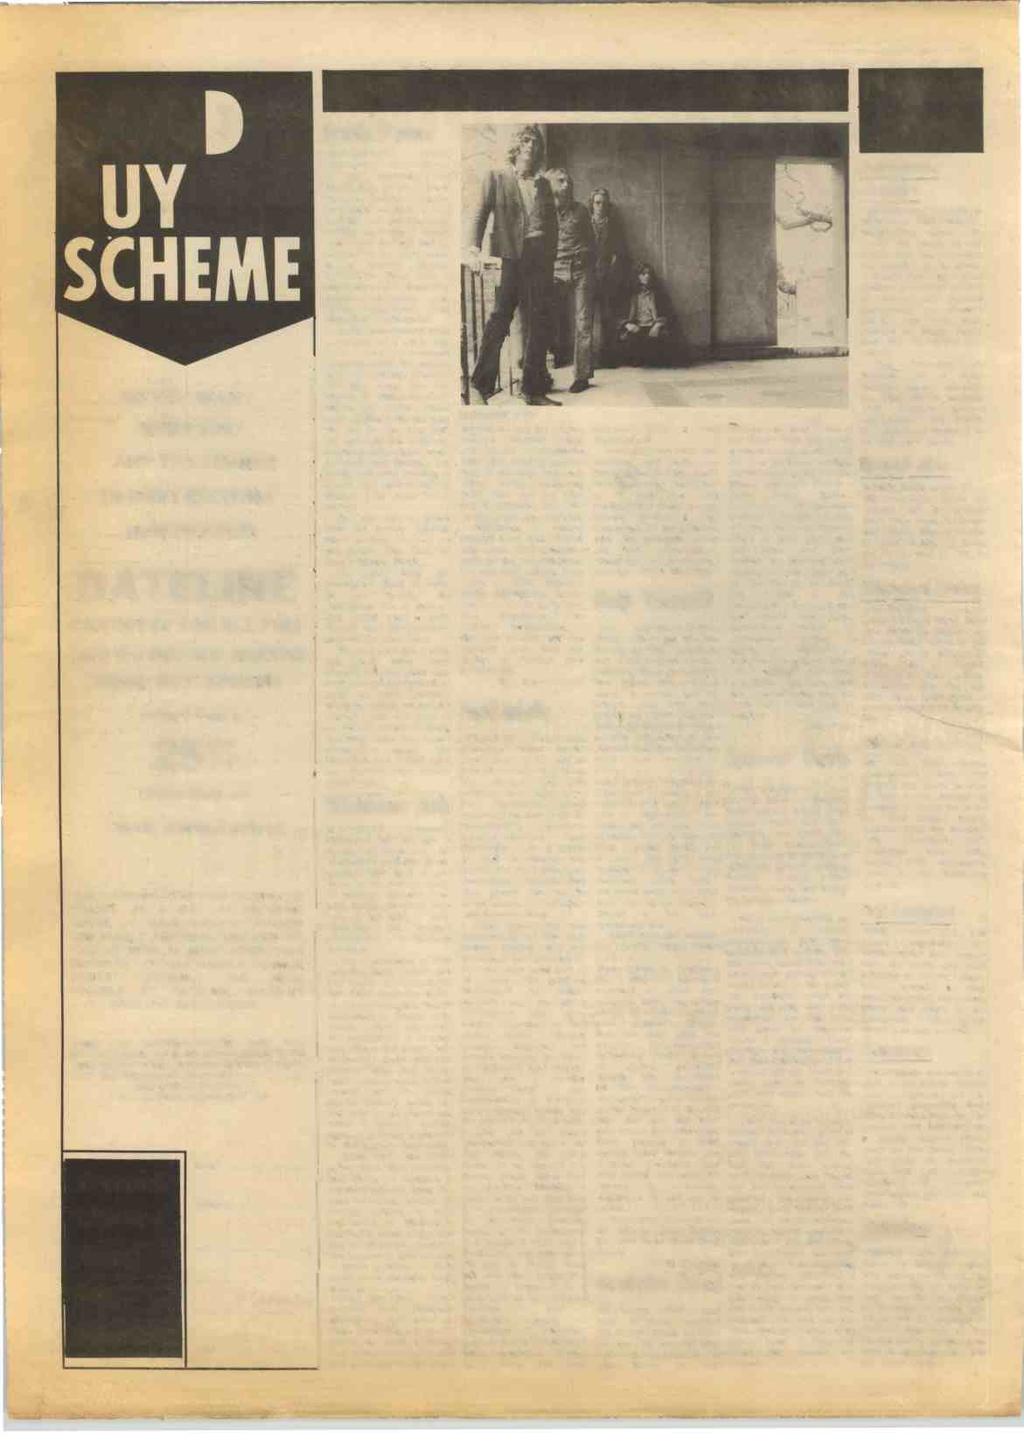 6 RECORD MIRROR, May 15, 1971 GOOD BUY SCHEME DO YOU WANT MORE FUN? AND THE CHANCE TO MEET EXCITING NEW PEOPLE?